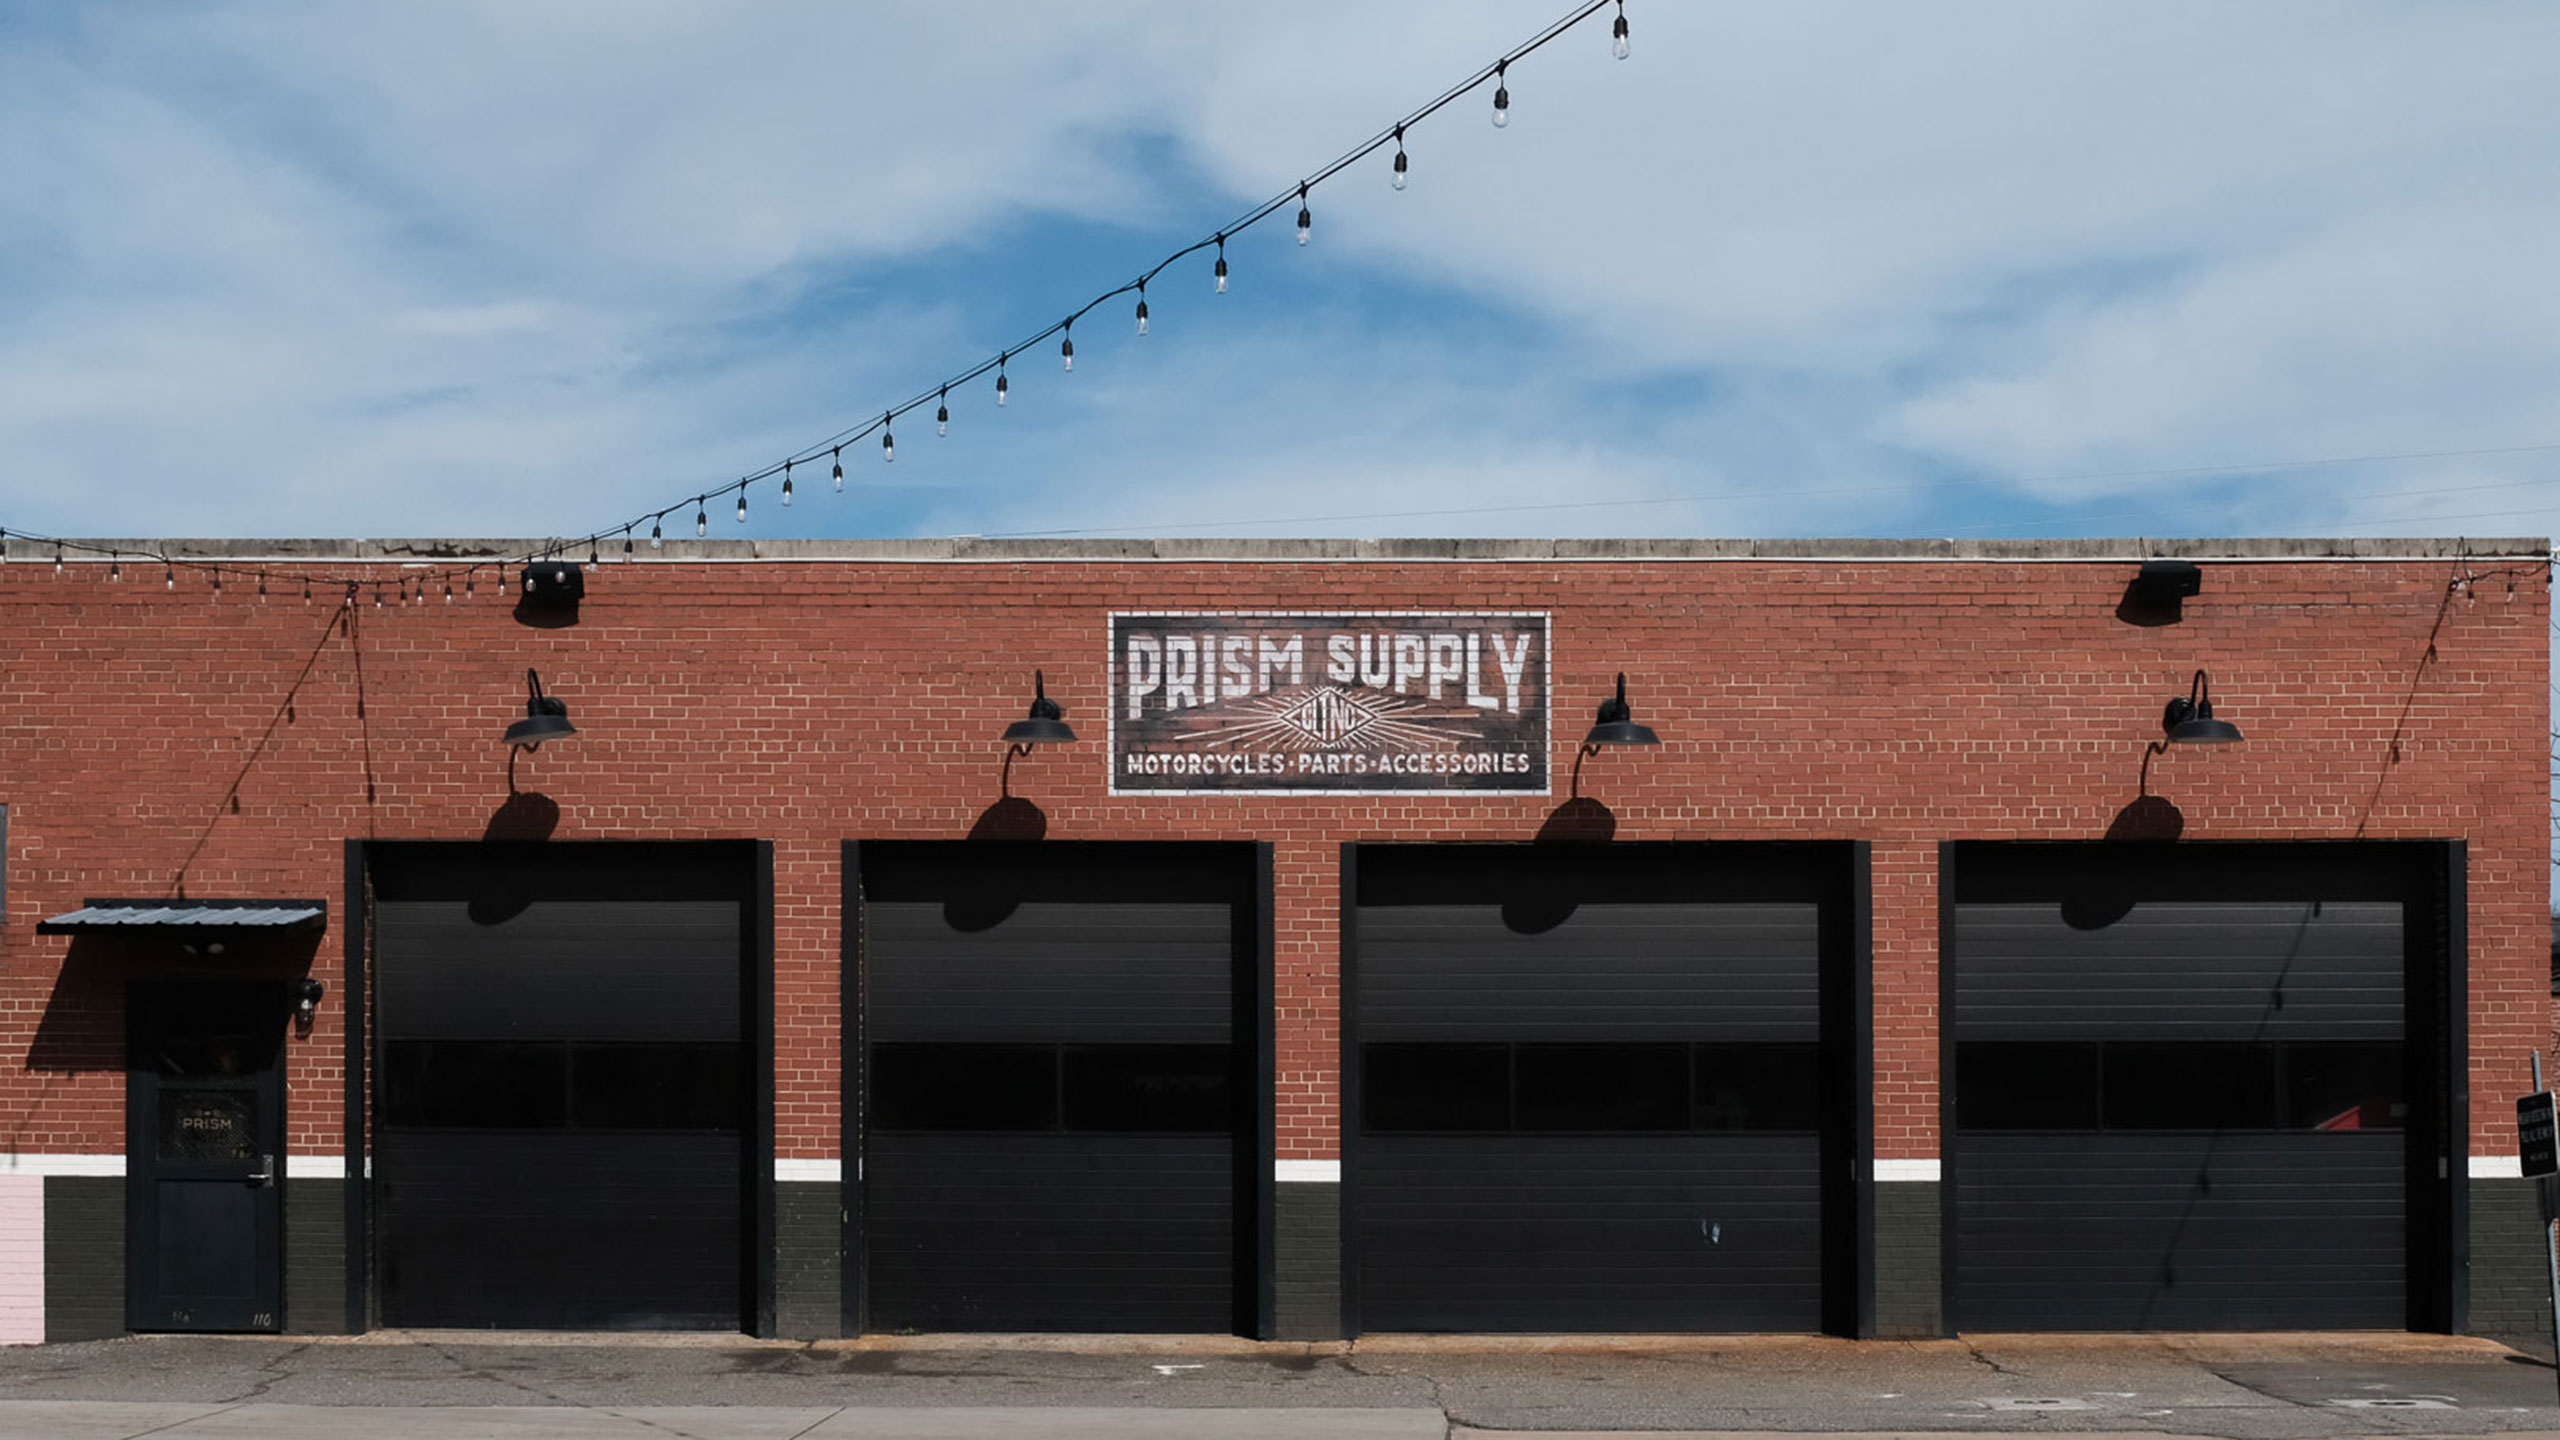 Shop Talk with Prism Supply